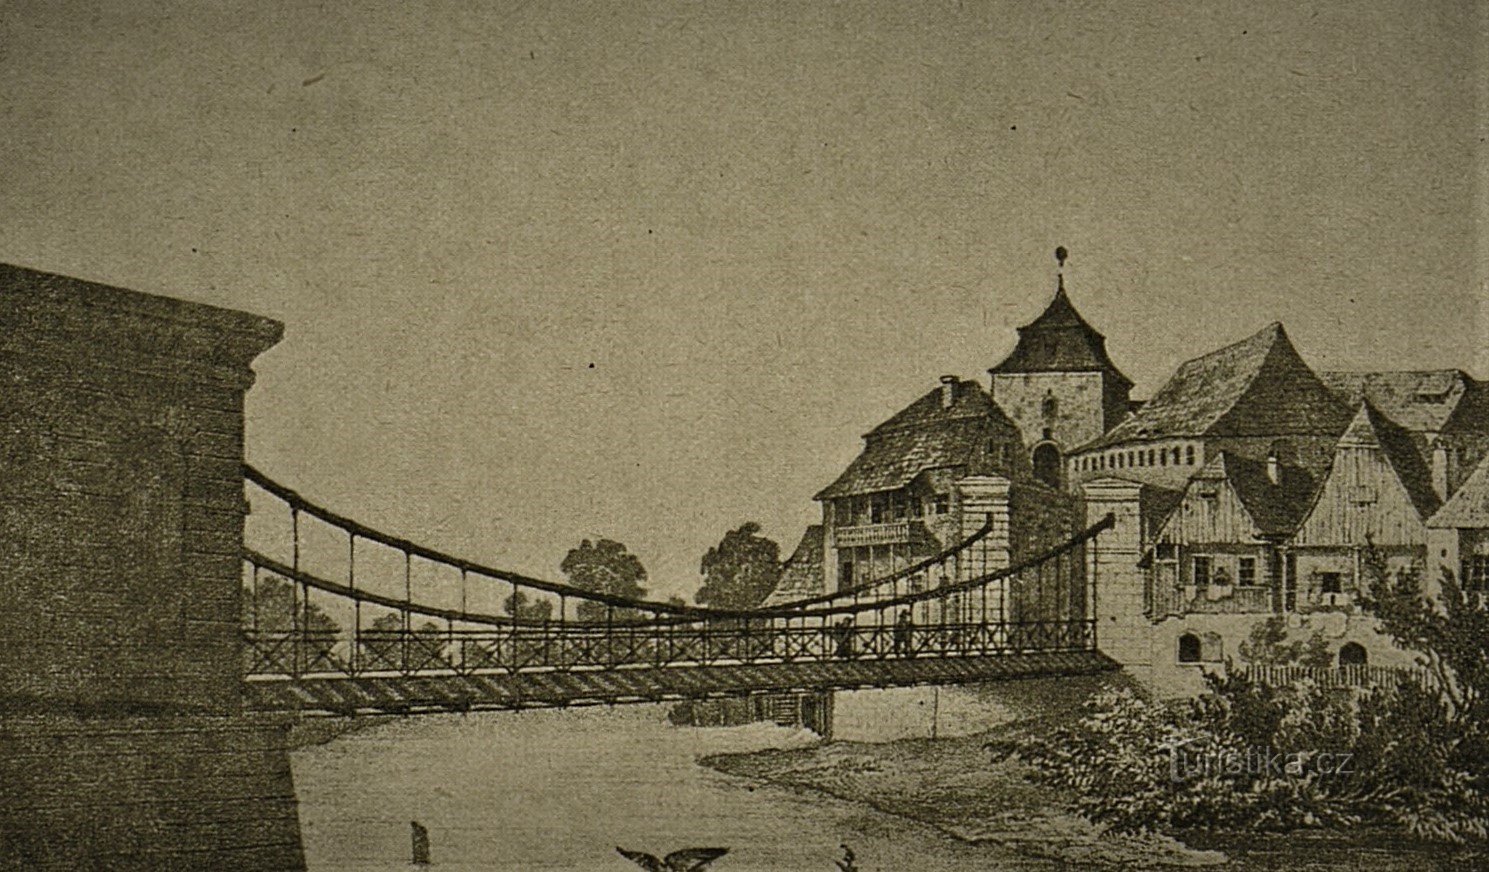 The bridge over the Elbe and the Podzidni mill behind it (Jaroměř, 2nd half of the 19th century)